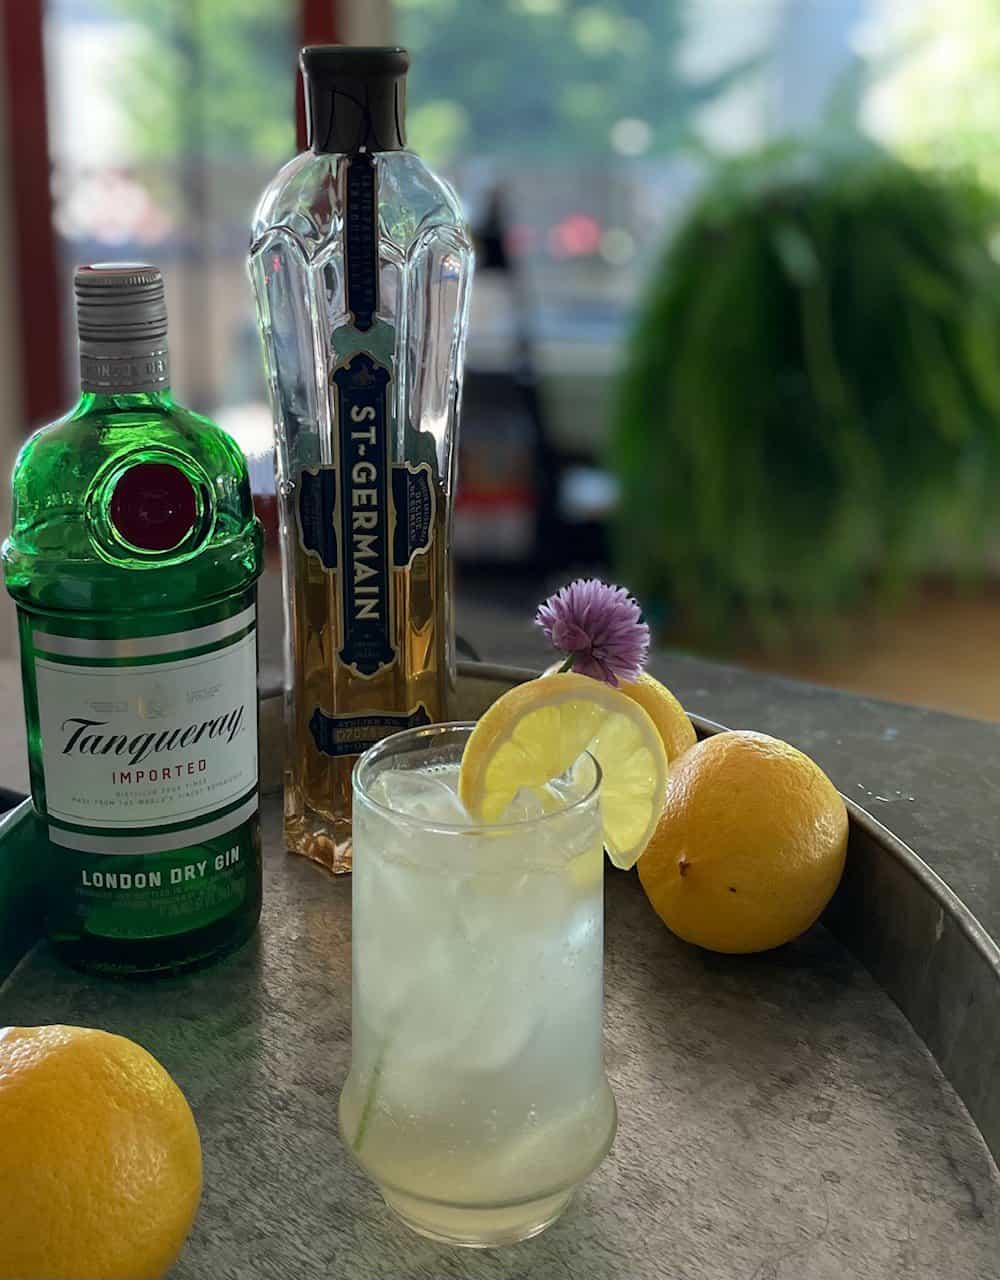 An elderflower Collins garnished with a lemon slice and chive blossom with lemons and liquor bottles